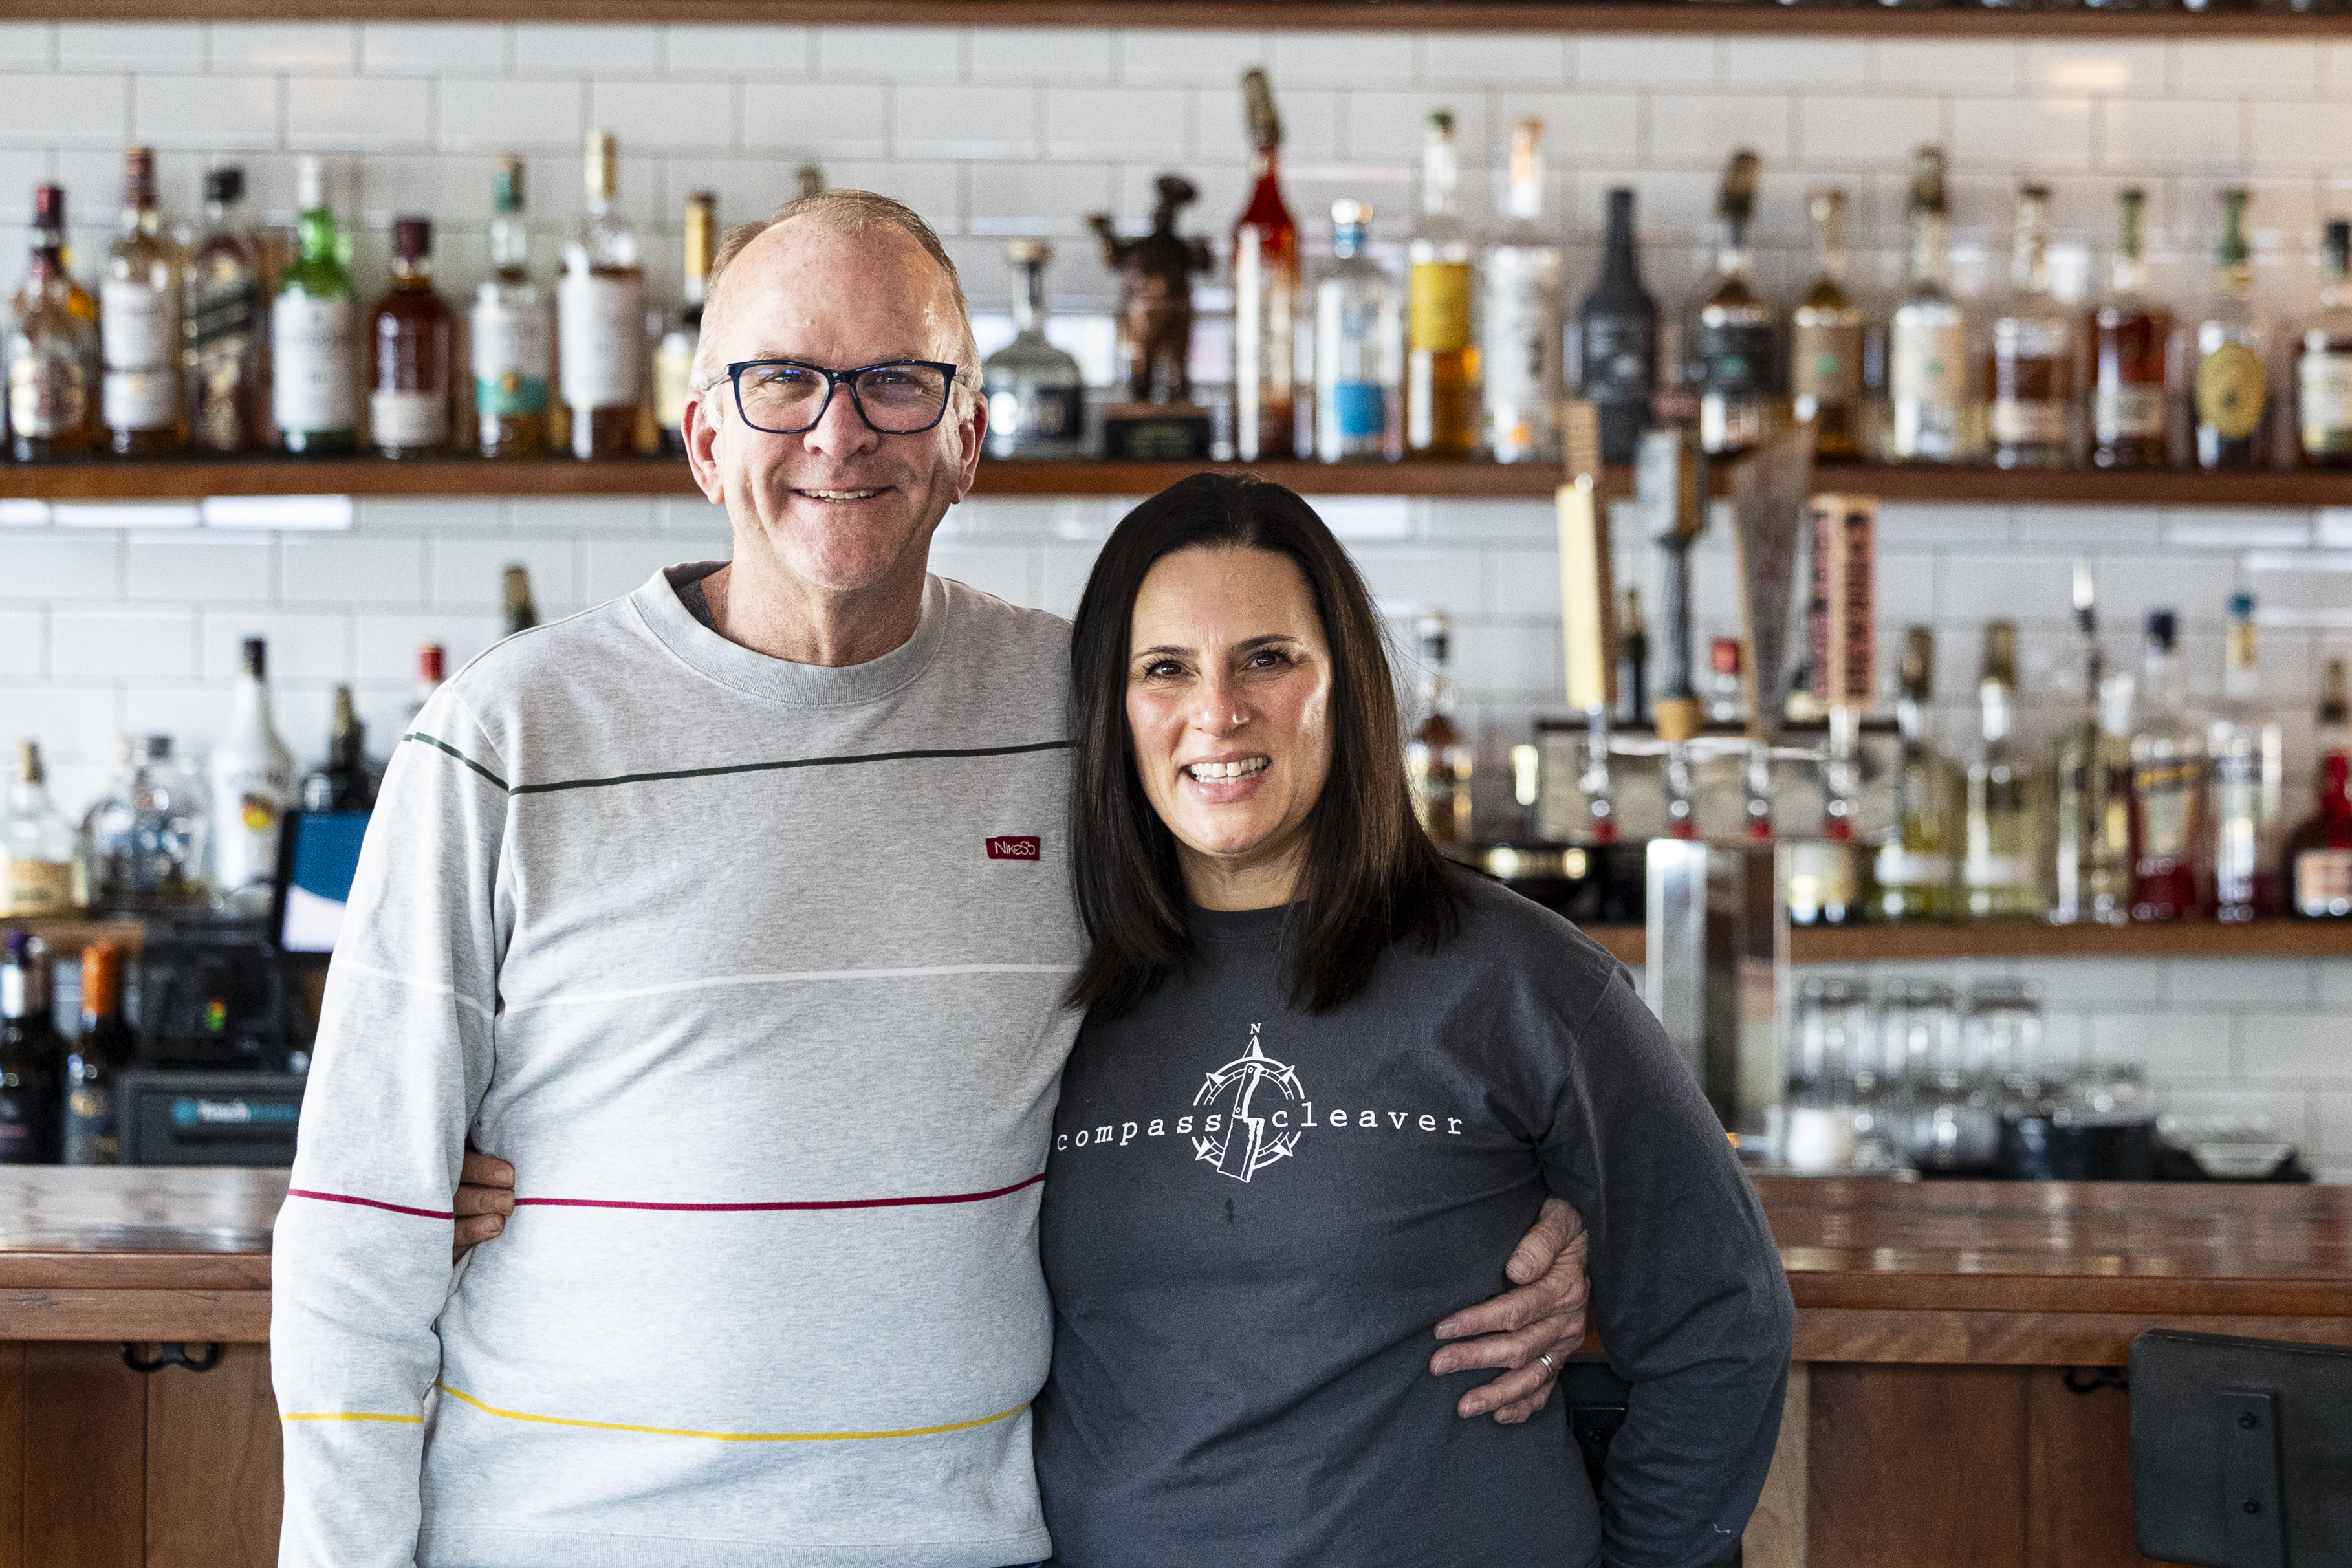 Compass and Cleaver owners Paul Sr. and Jennifer Dykstra pose for a portrait inside their new restaurant that is a collaboration of South Kitchen and Kitchen House at 12454 E D Ave. in Richland, Michigan. Jennifer is also the head chef of Compass and Cleaver.